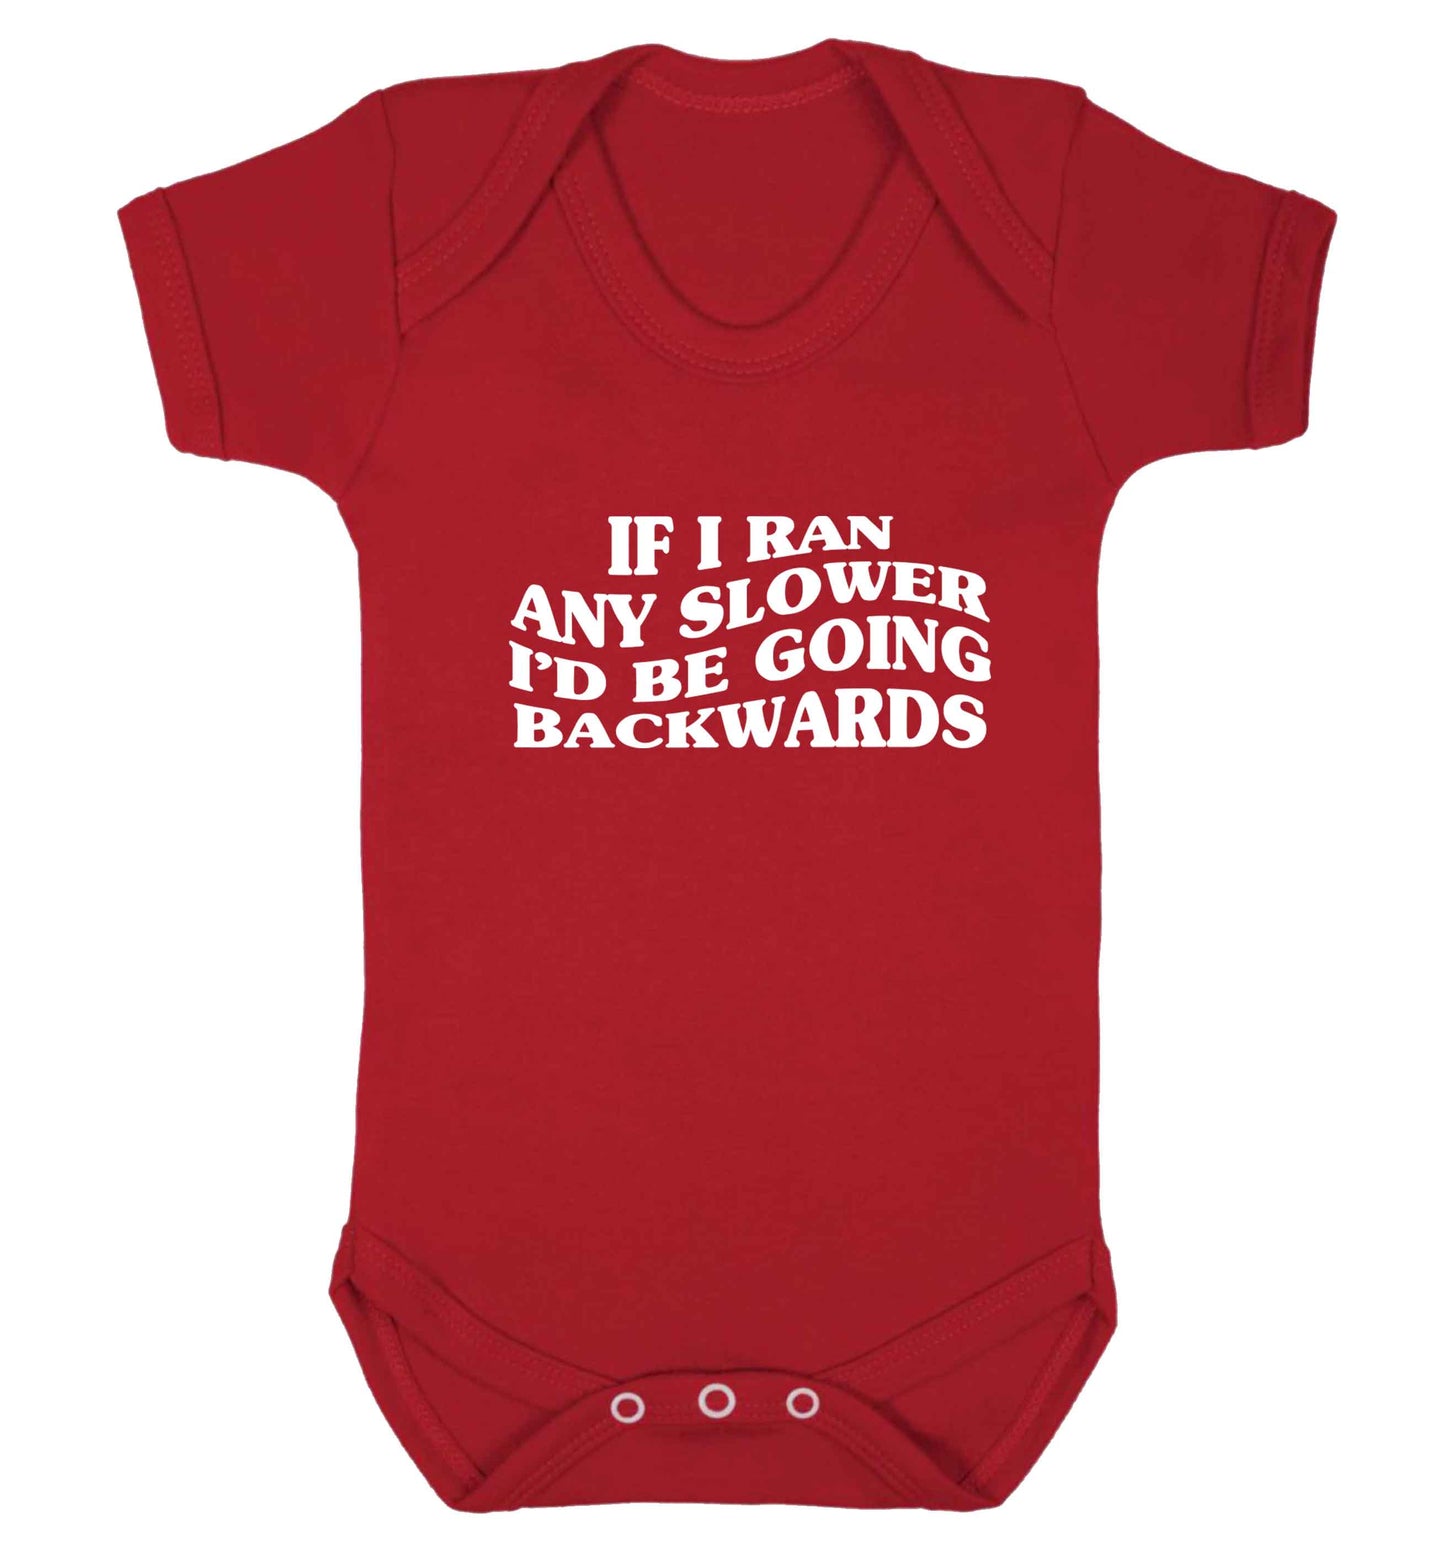 If I ran any slower I'd be going backwards baby vest red 18-24 months